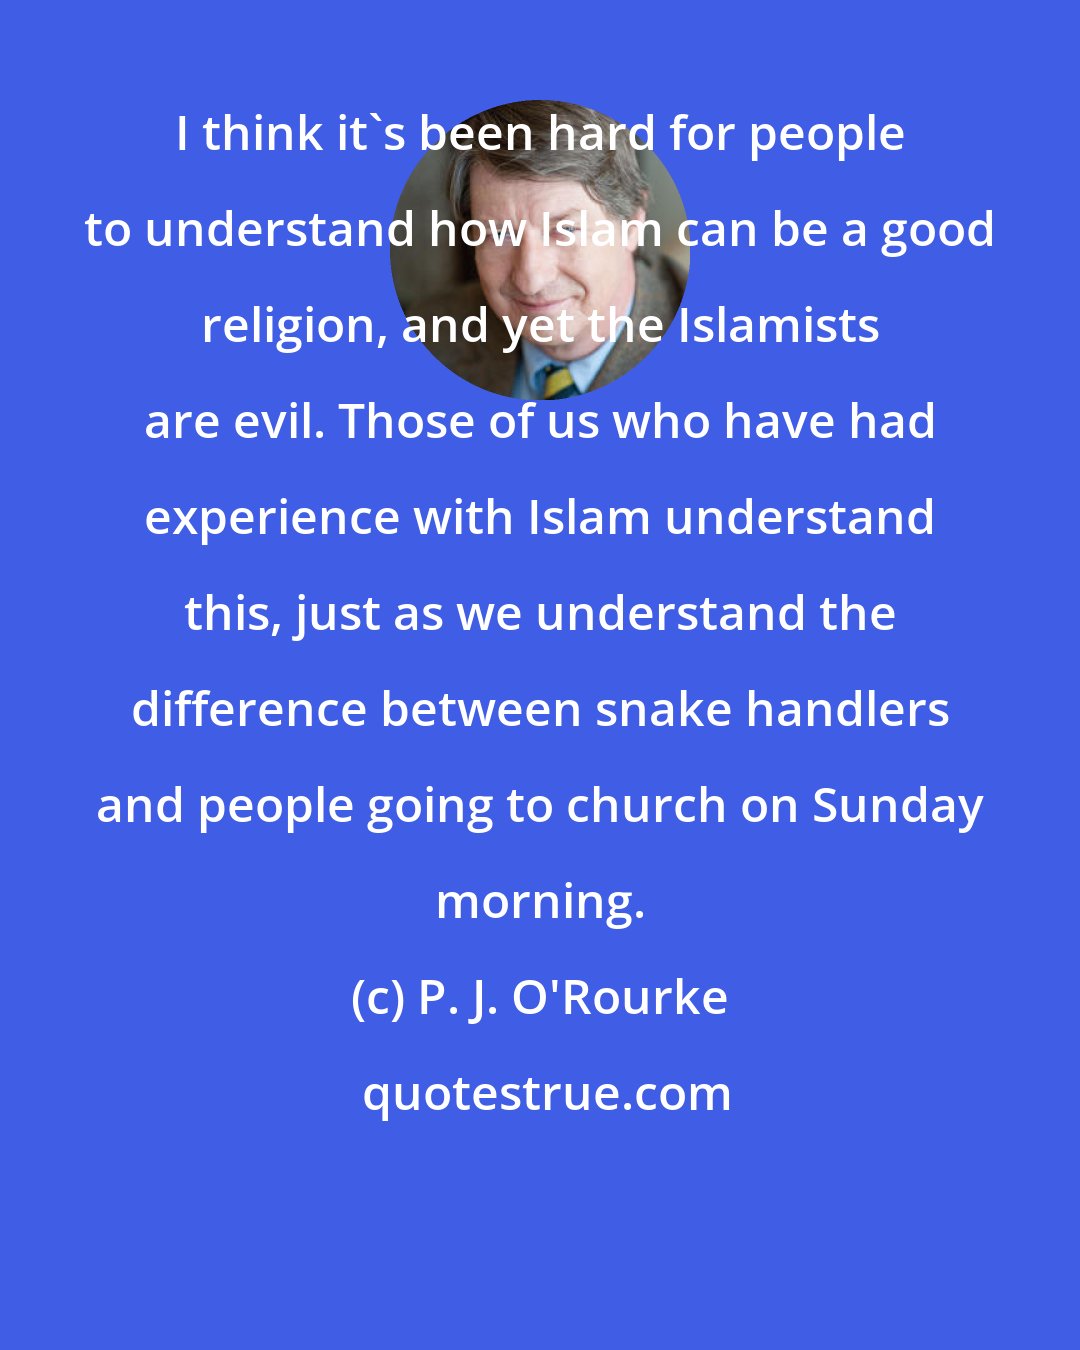 P. J. O'Rourke: I think it's been hard for people to understand how Islam can be a good religion, and yet the Islamists are evil. Those of us who have had experience with Islam understand this, just as we understand the difference between snake handlers and people going to church on Sunday morning.